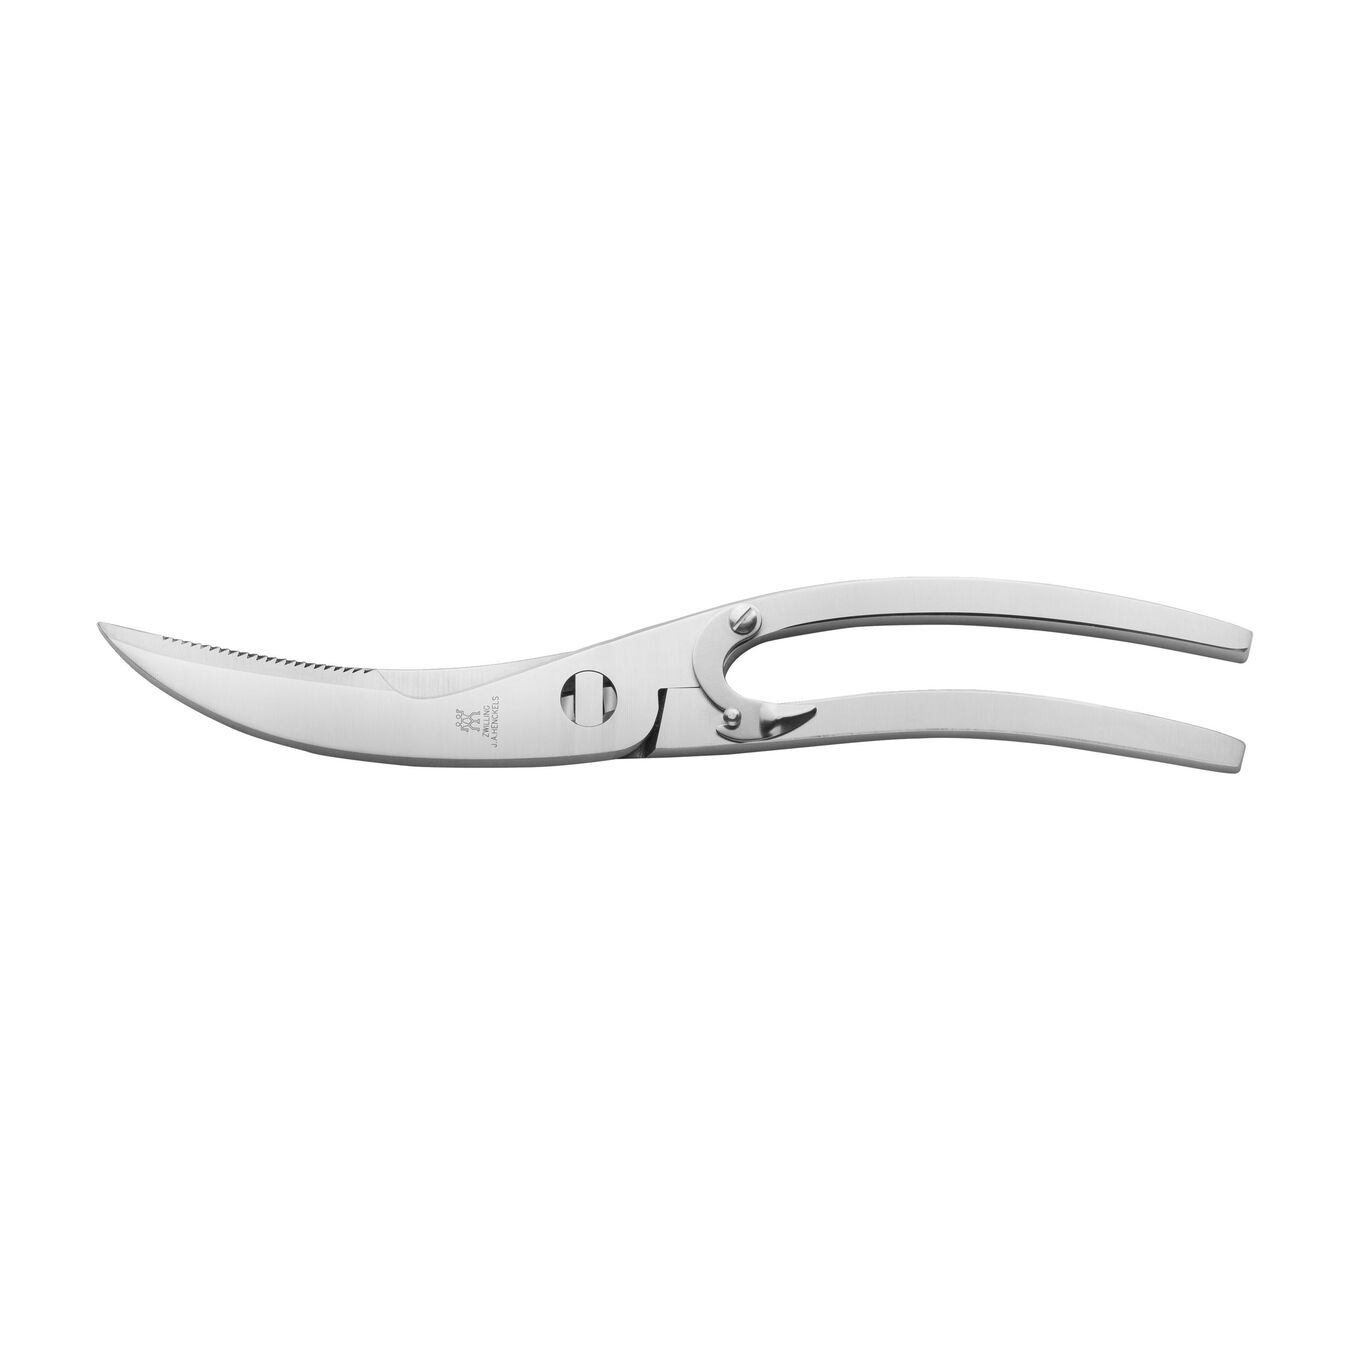 24 cm Stainless steel Poultry shears,,large 1